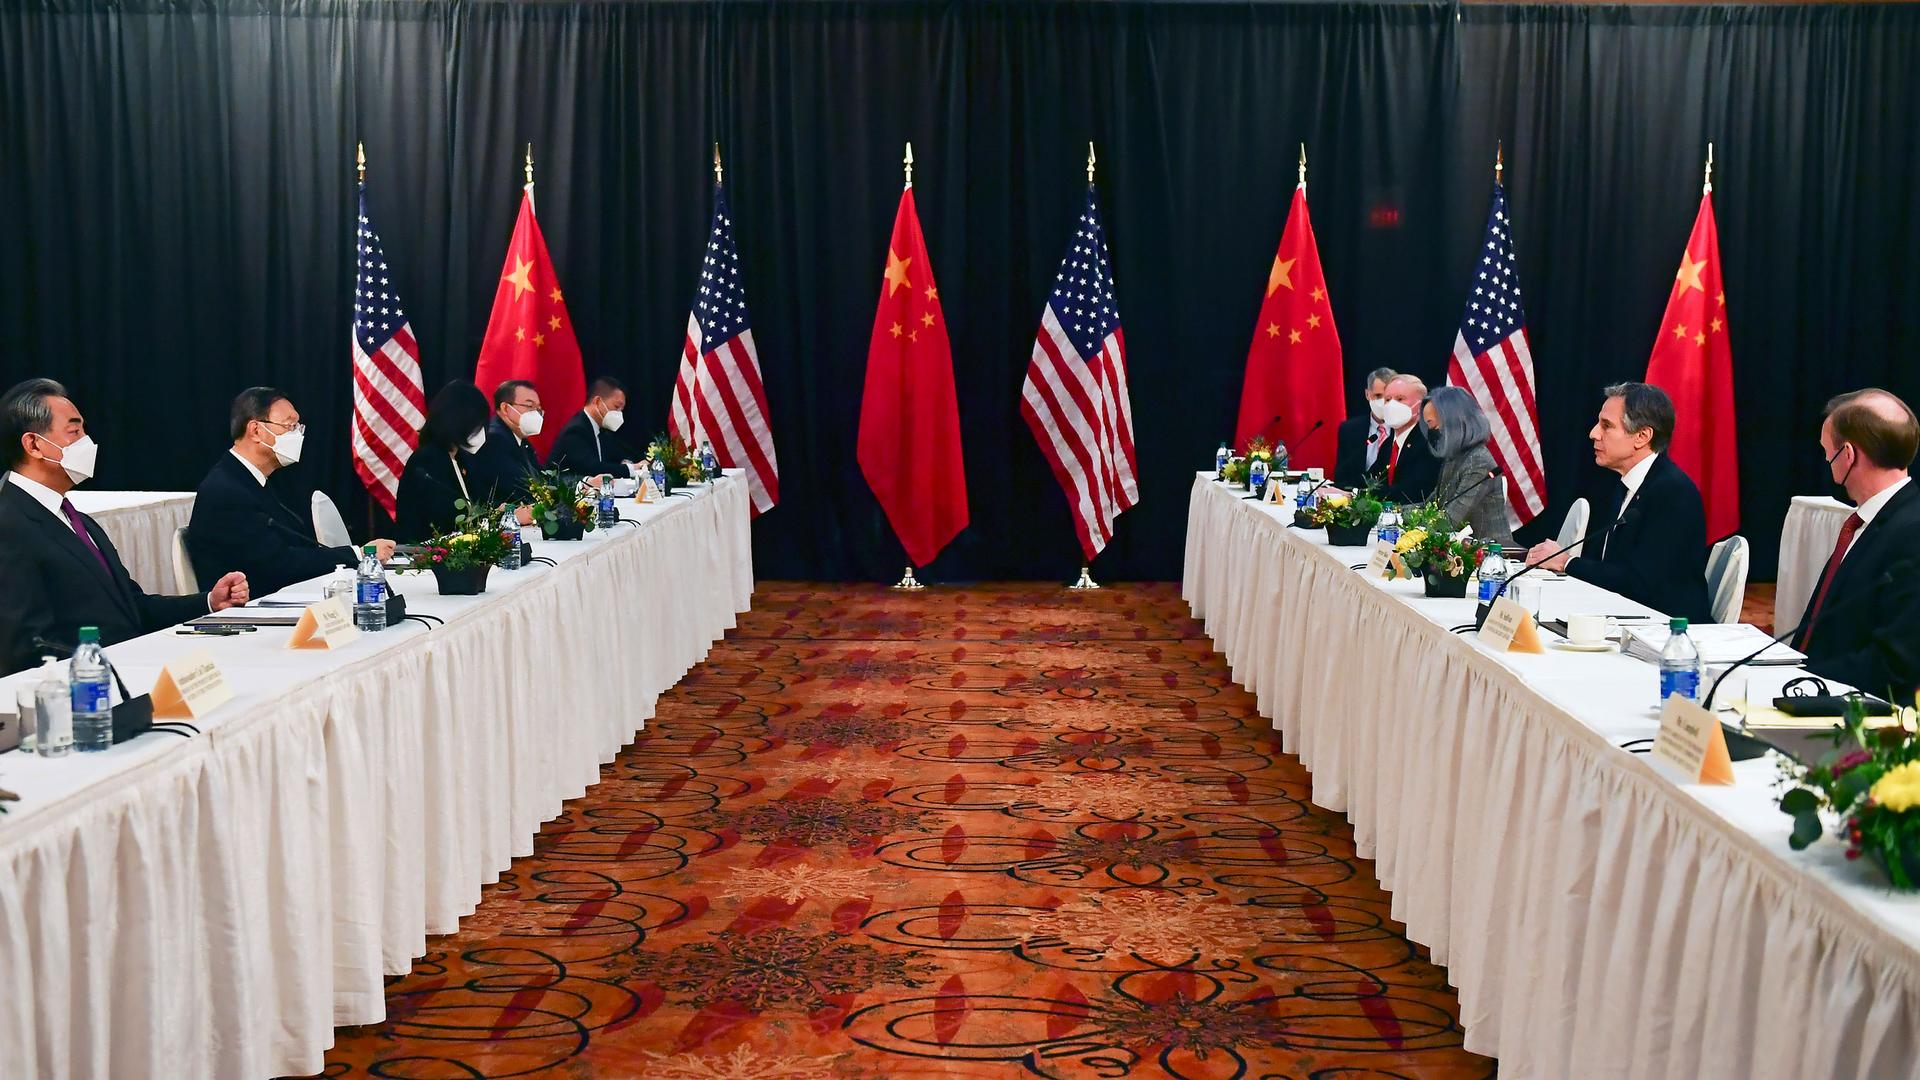 Two long rows of tables are shown with white table cloths and officials on either side with US and Chinese flags in the distance.